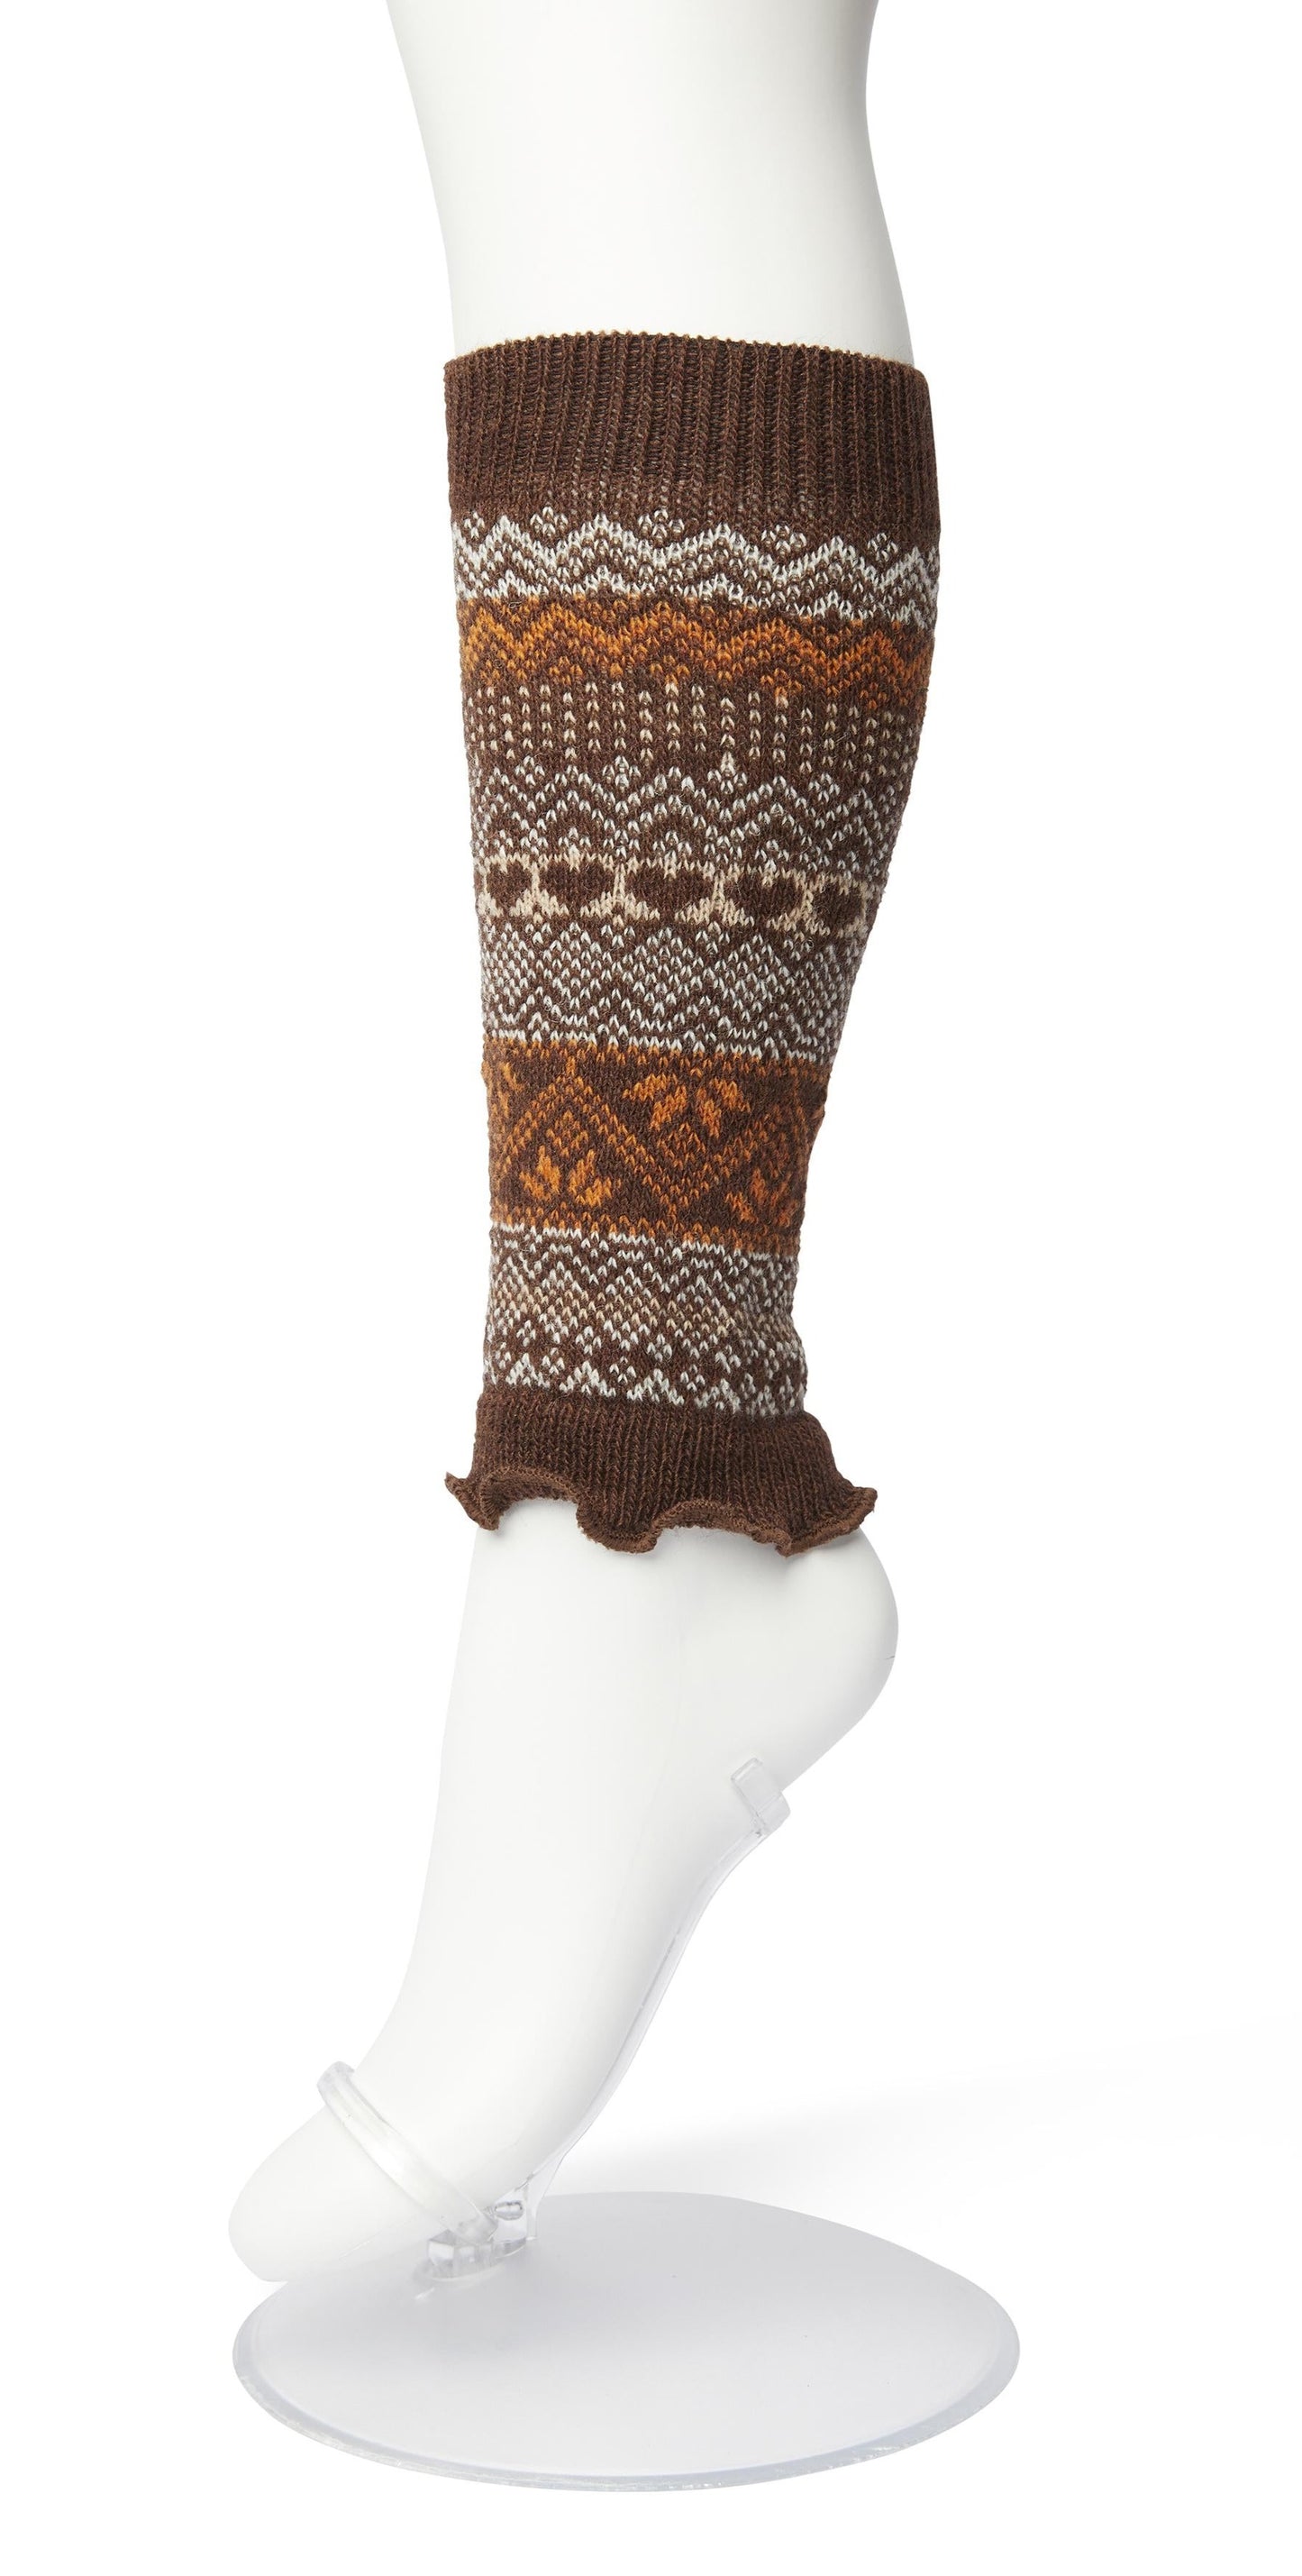 Bonnie Doon BP051729 Folkloric Legwarmers - Light brown, rust orange and white warm and soft knee length knitted leg-warmers with a fairisle style pattern, elasticated cuff and frill edge.